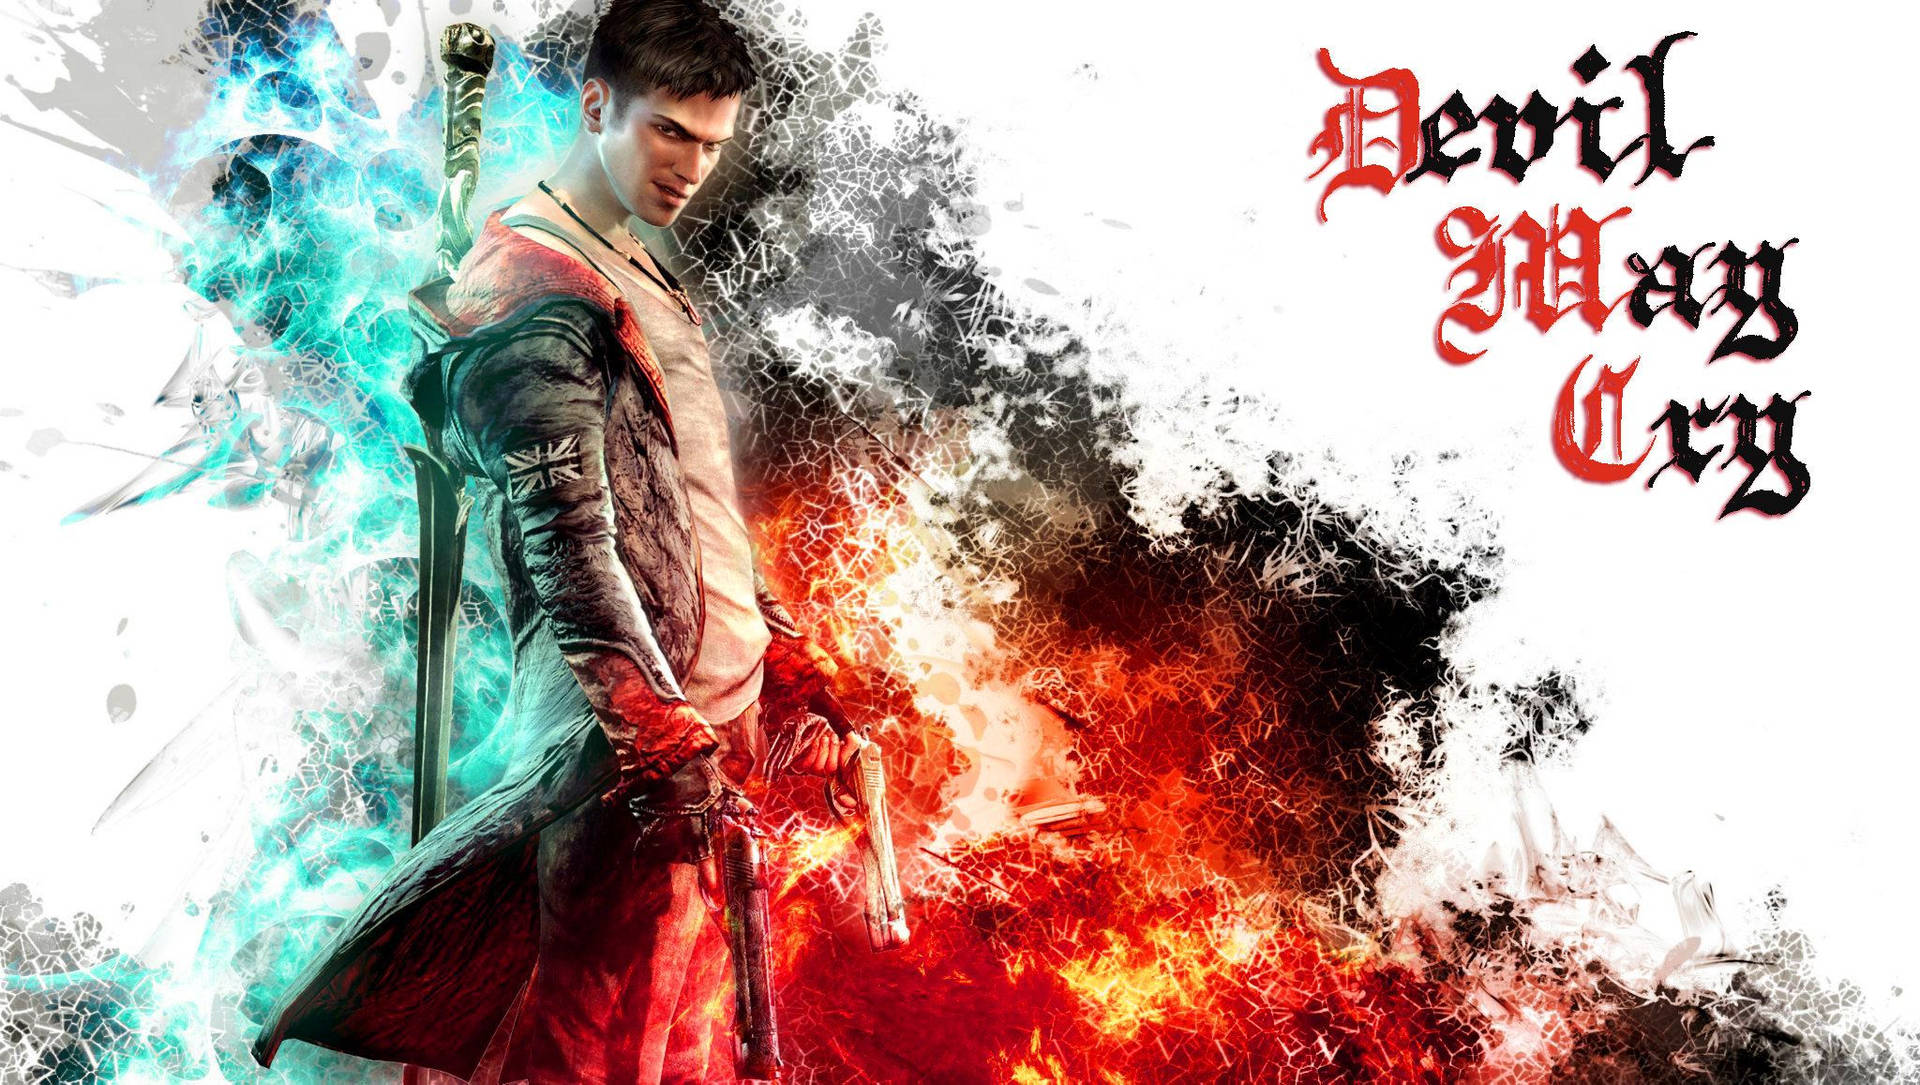 Dante Devil May Cry Poster Background